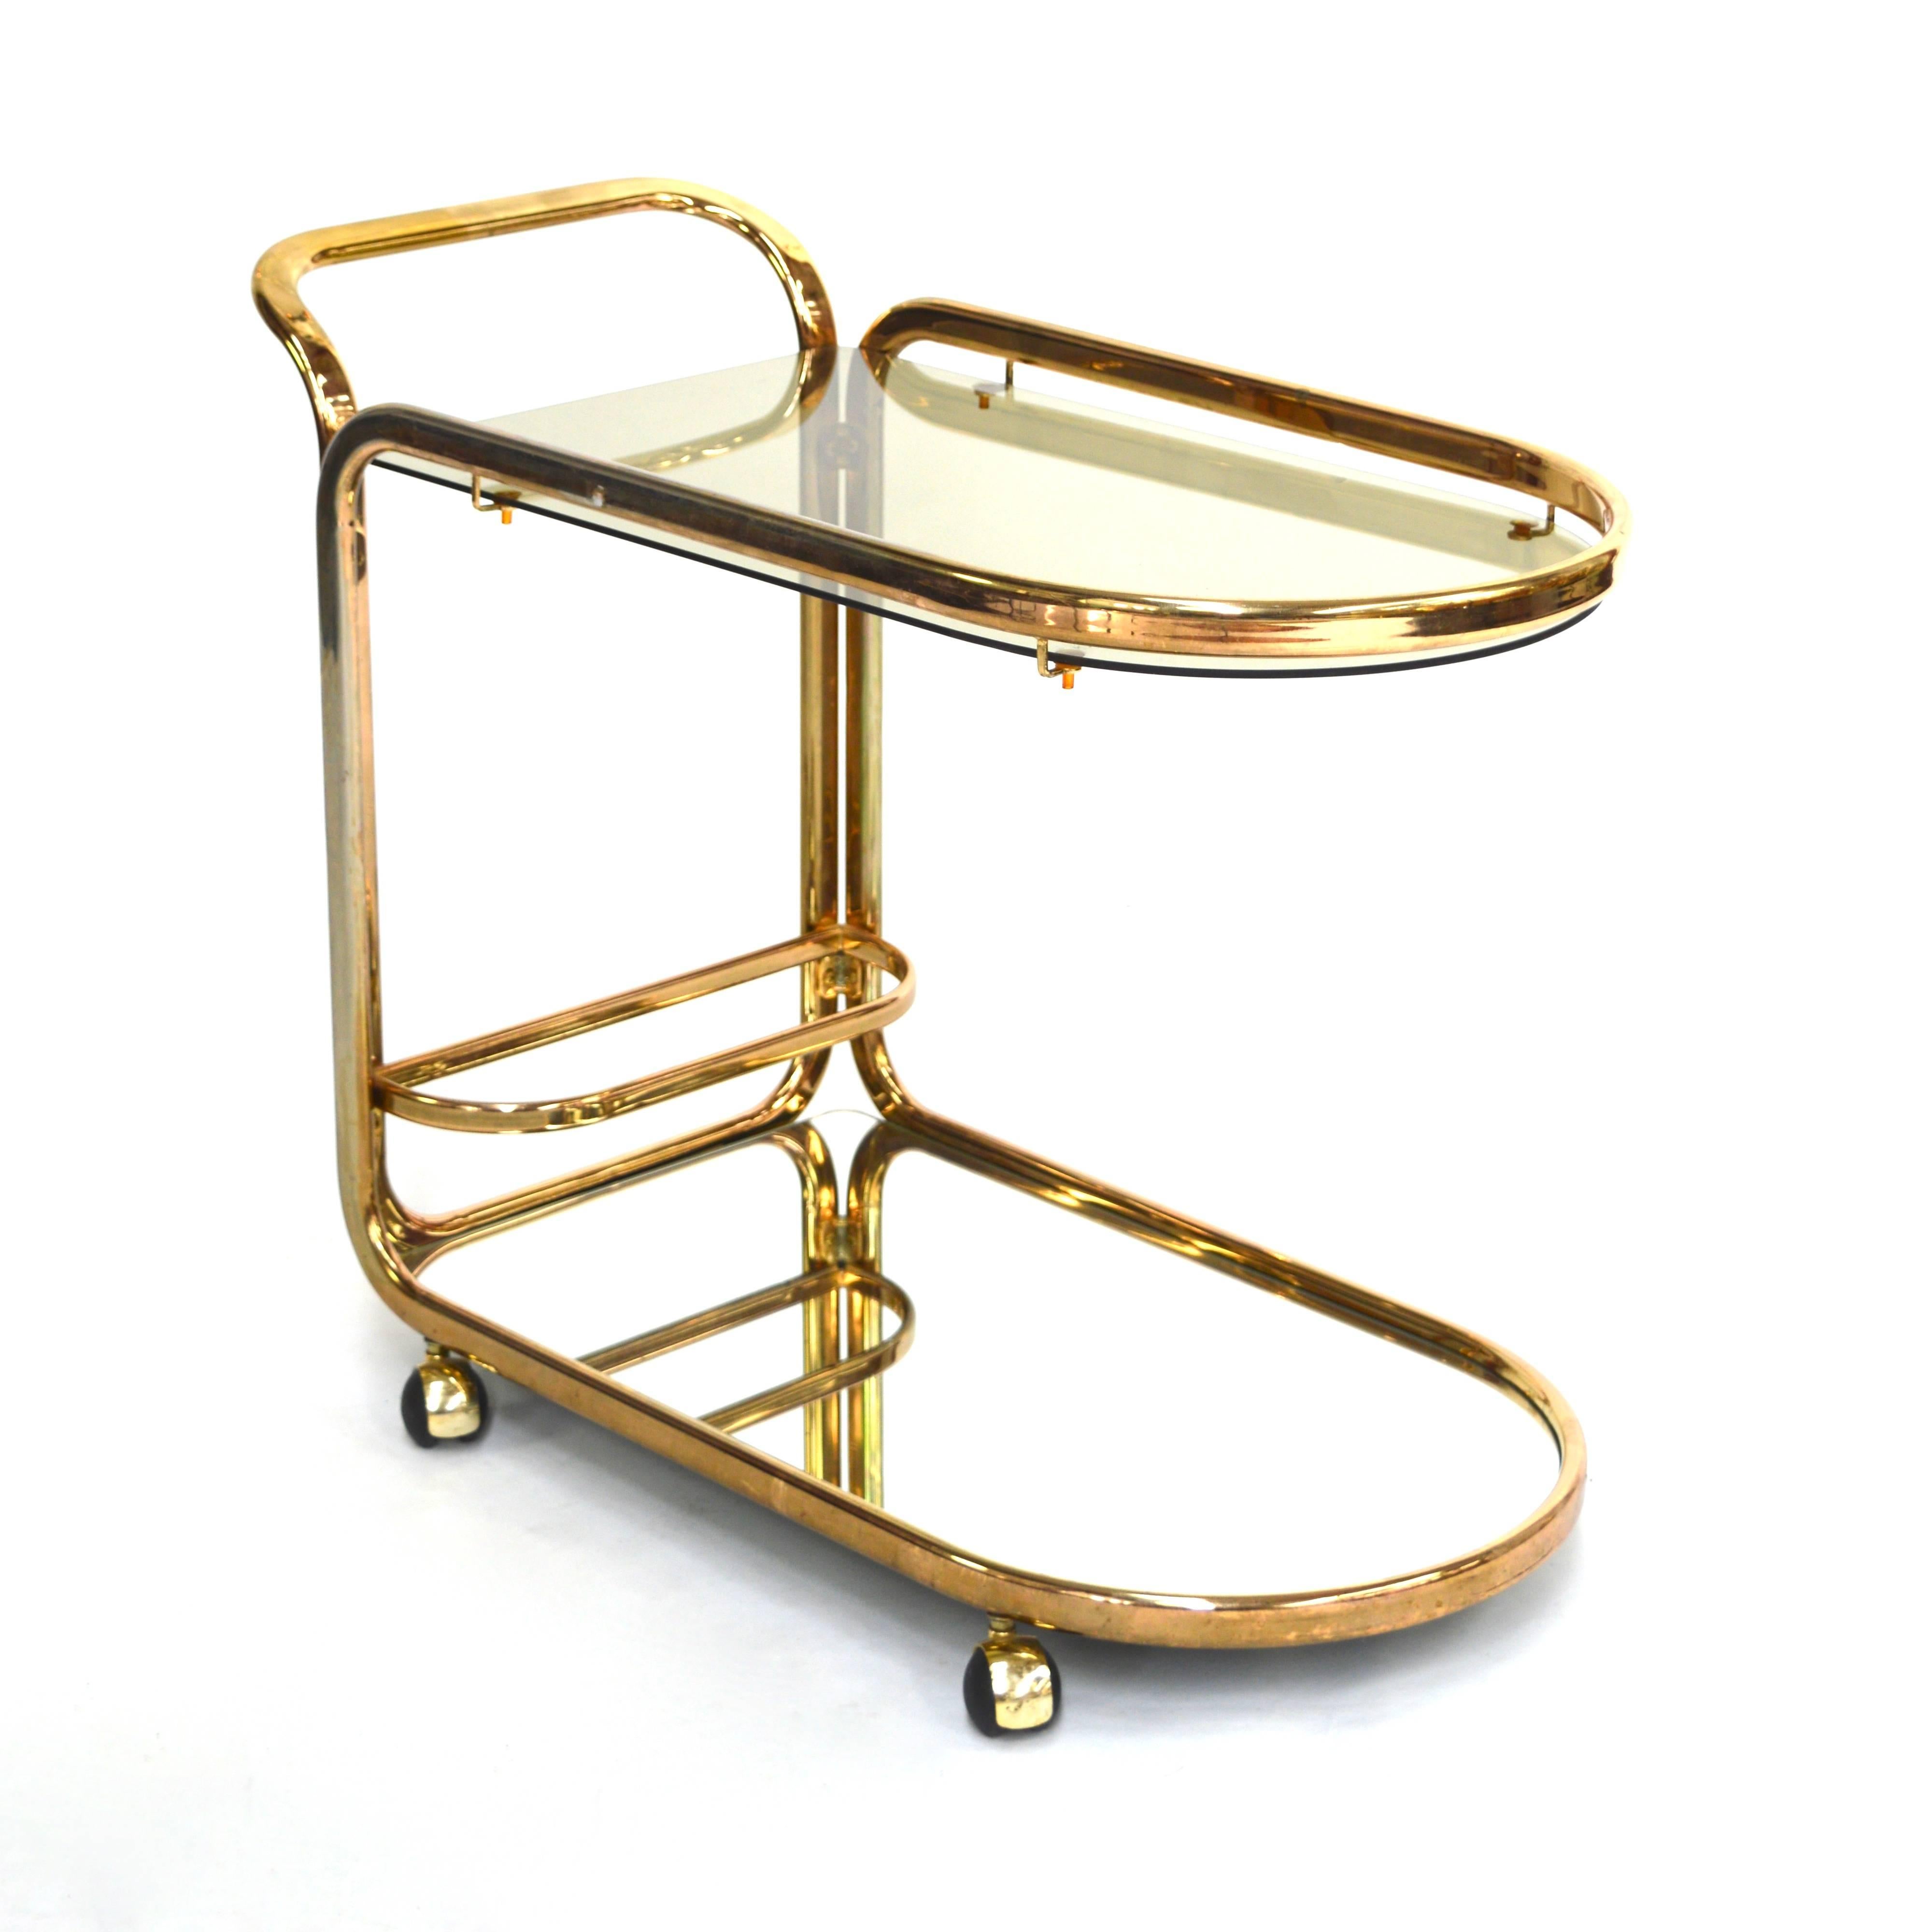 Very nice bar cart with tubular gold colored metal / mirror glass / smoked glass.
It is in good condition but has some normal age related signs of wear and fading.